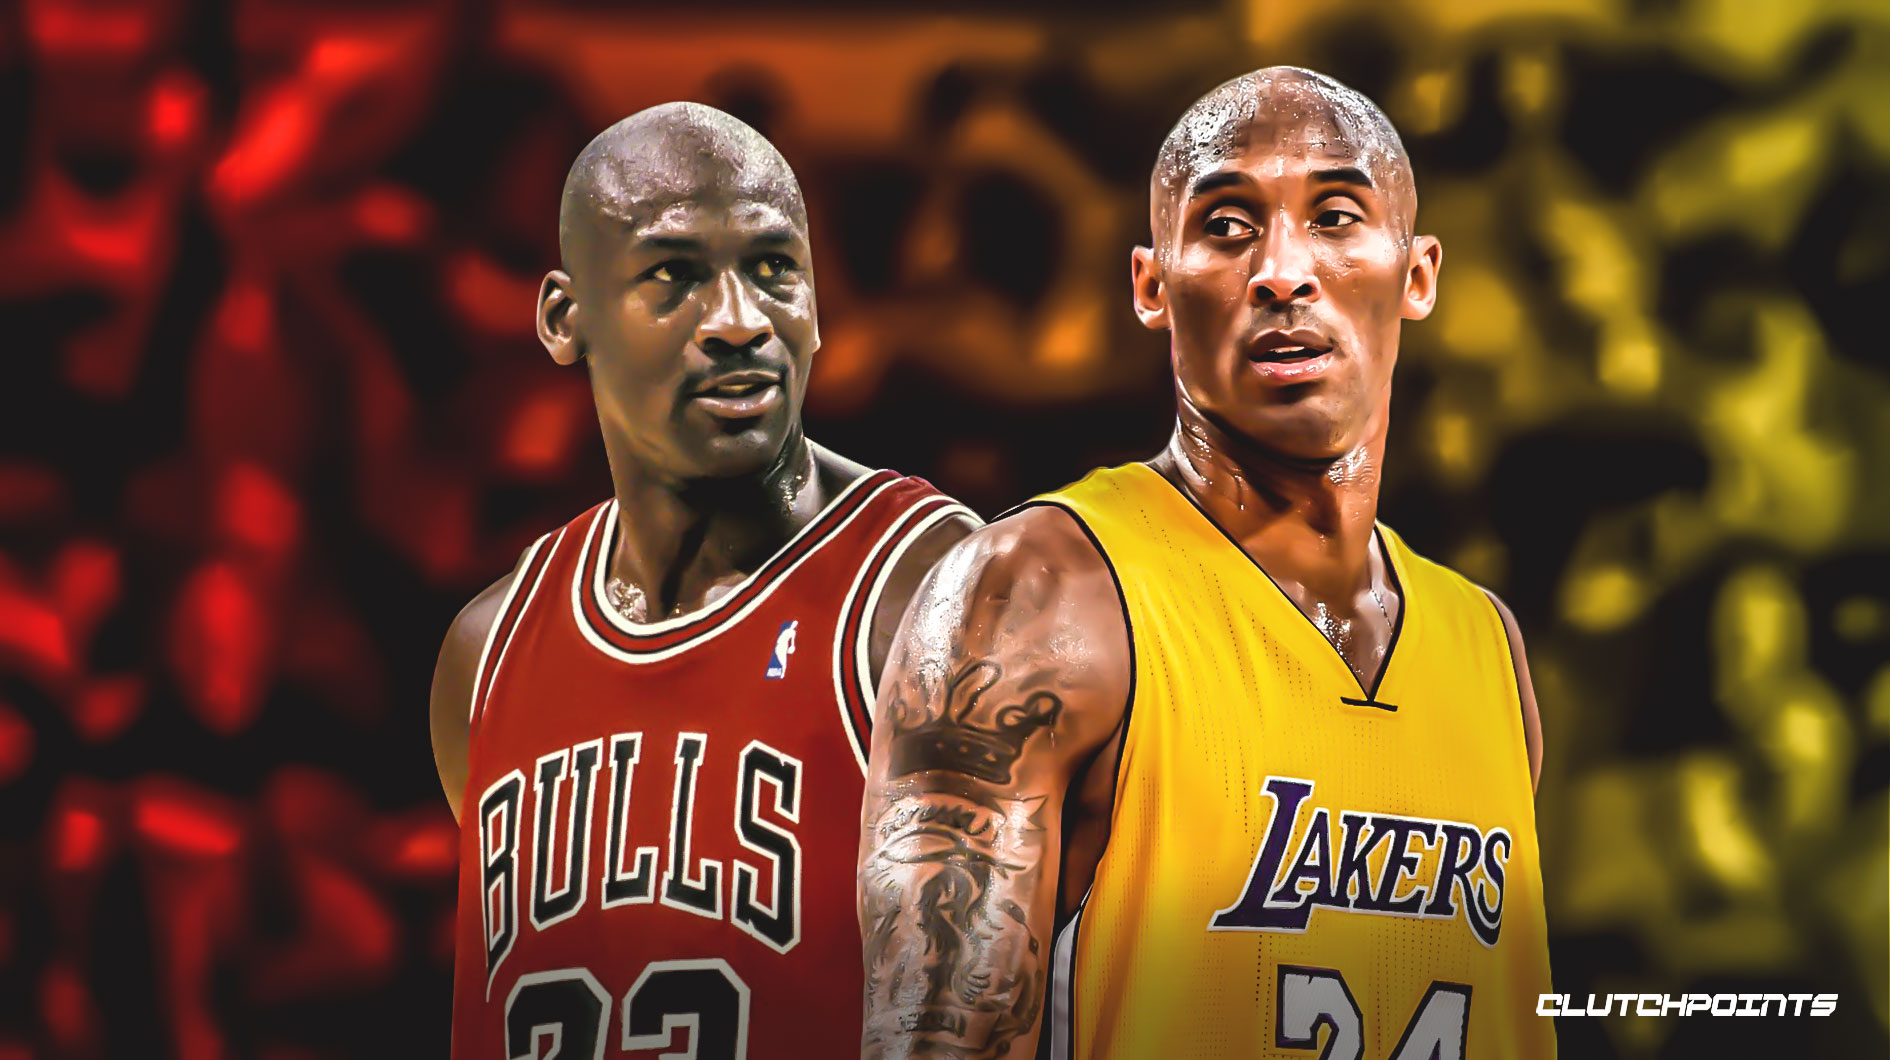 What-would-happen-if-Michael-Jordan-and-Kobe-Bryant-switched-eras